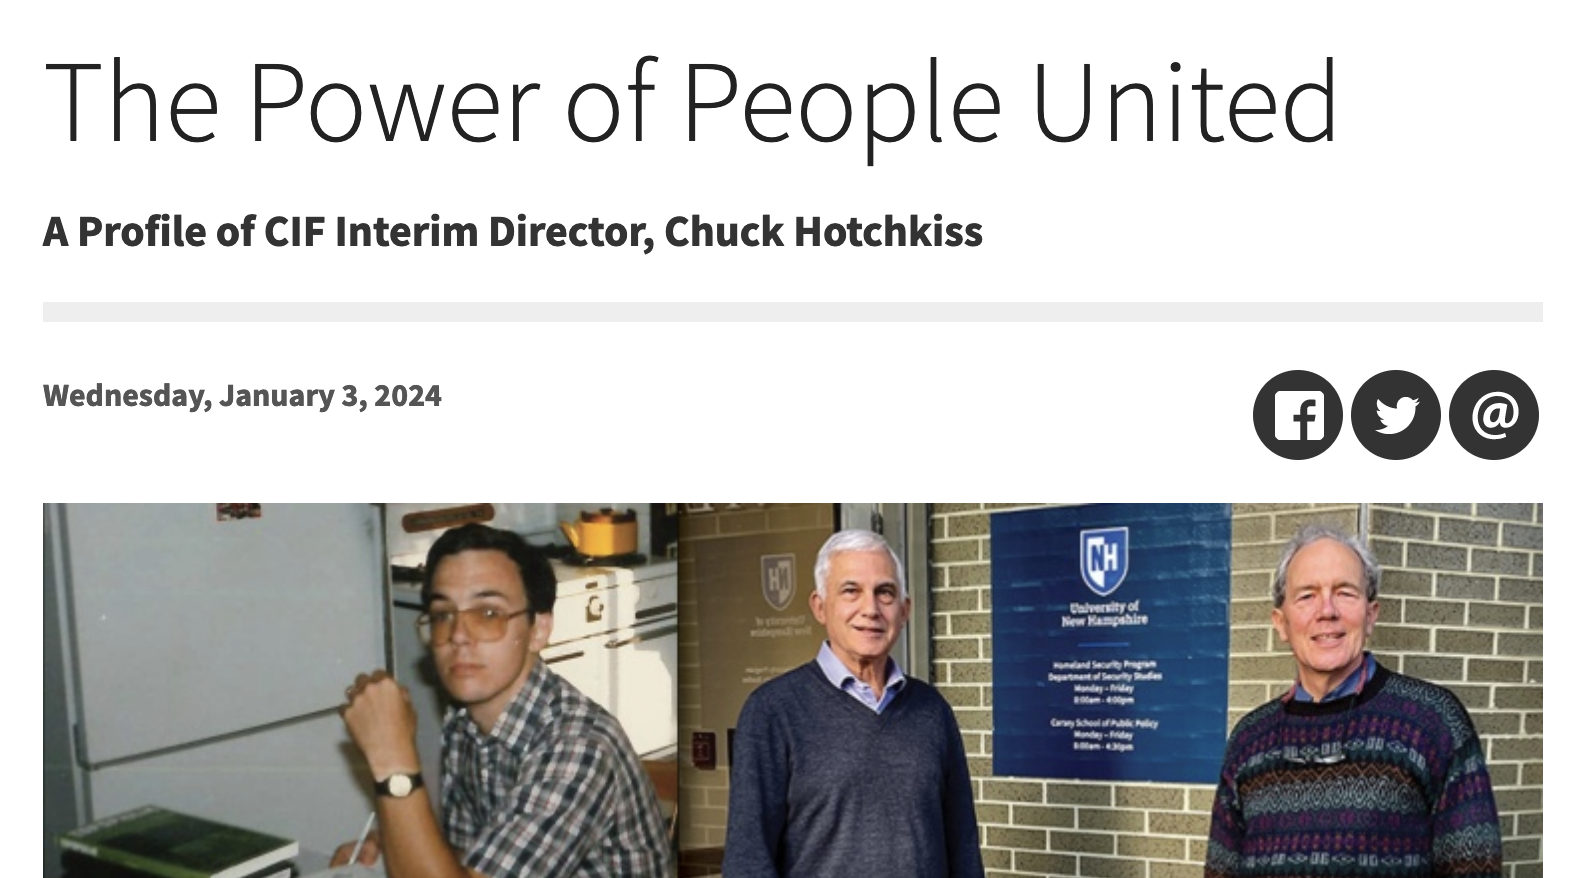 Power of People United - A Profile of Dr. Chuck Hotchkiss